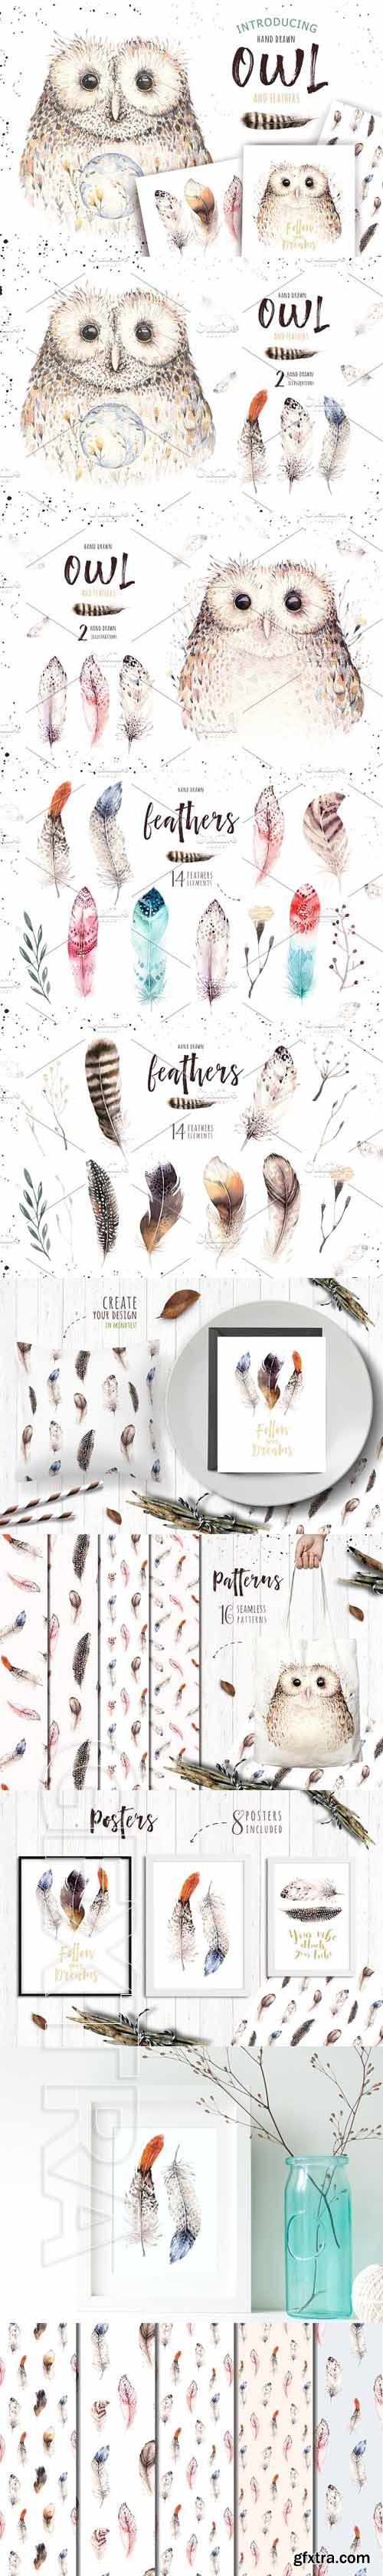 CreativeMarket - Watercolor owl & feathers collection 1754954